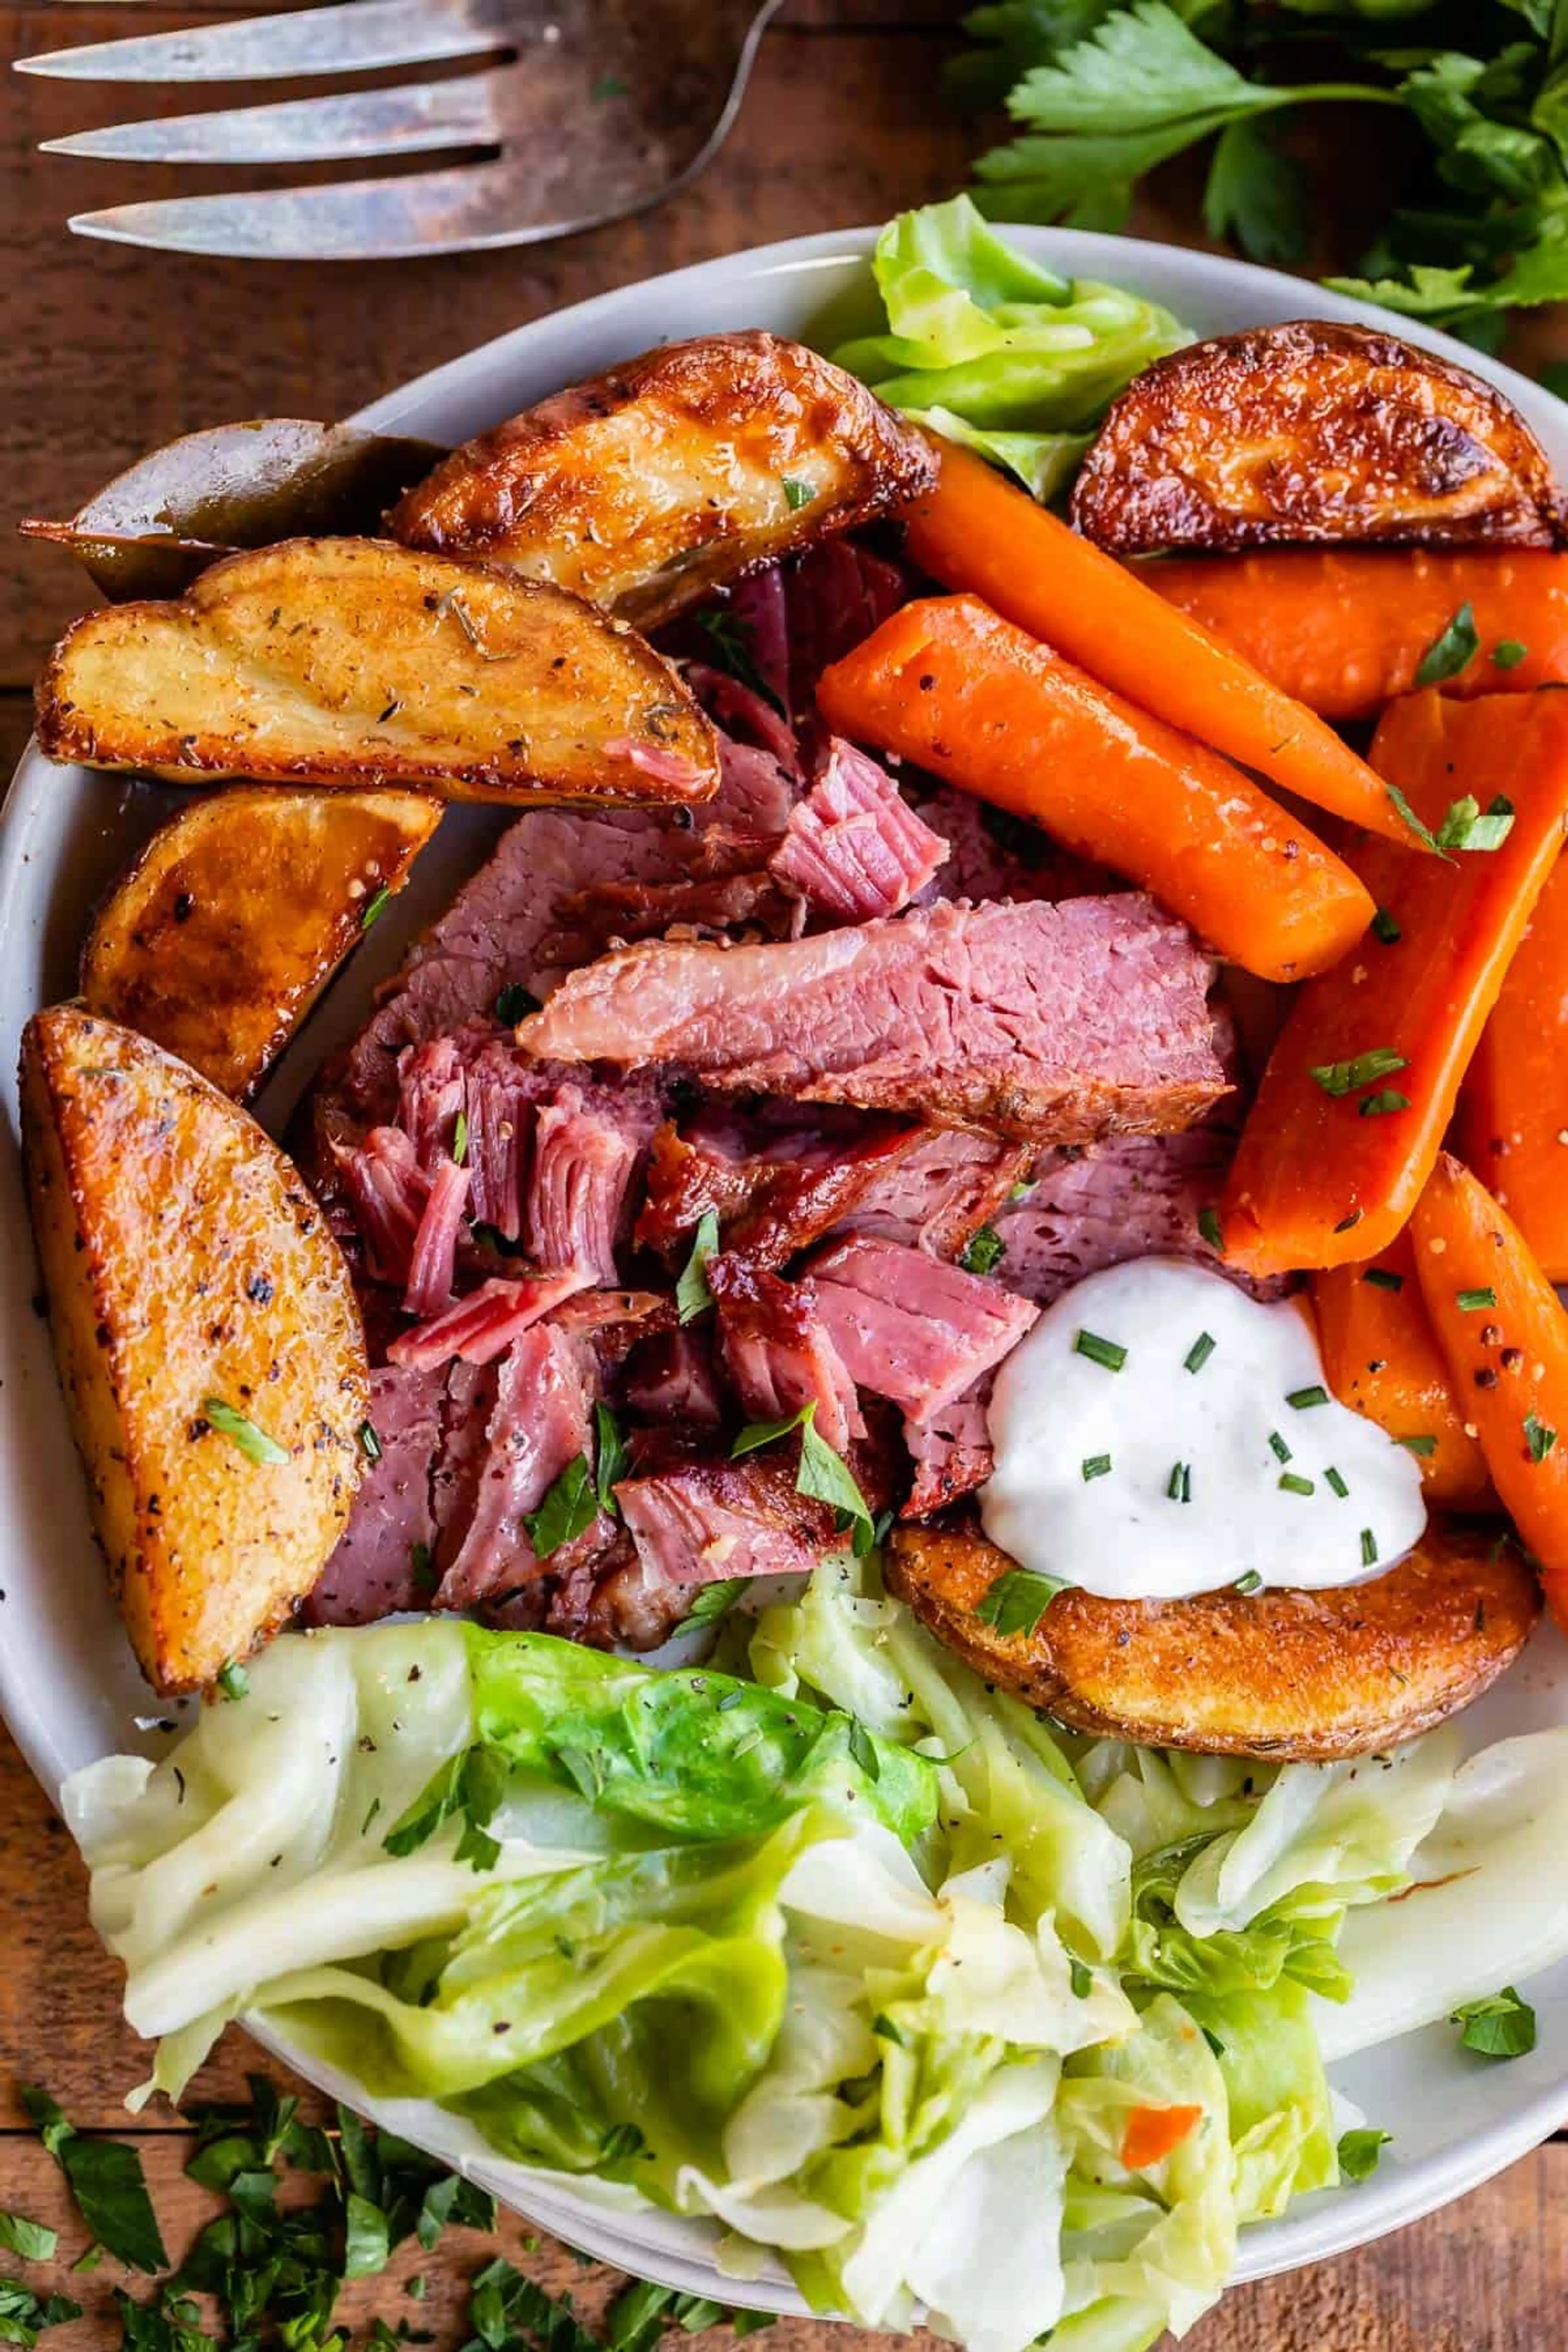 Best Recipe for Corned Beef and Cabbage